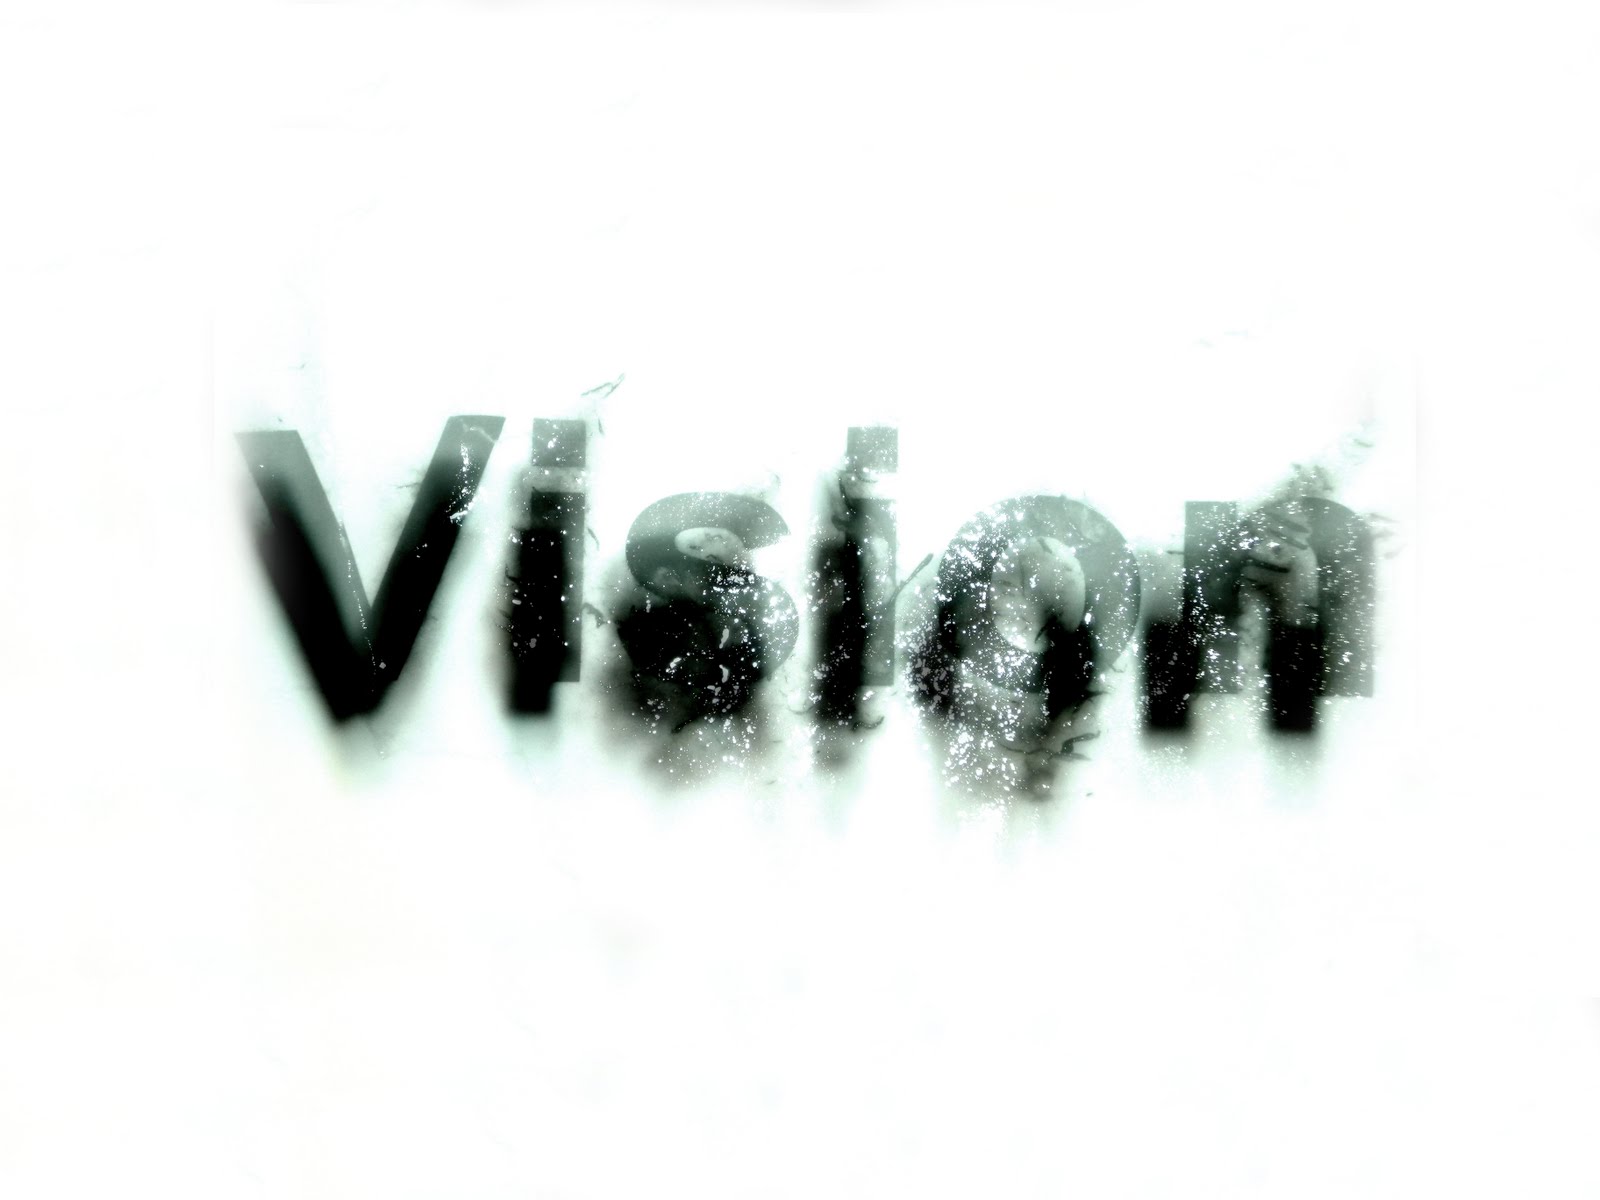 Open blog post titled 'Is your vision impaired?'